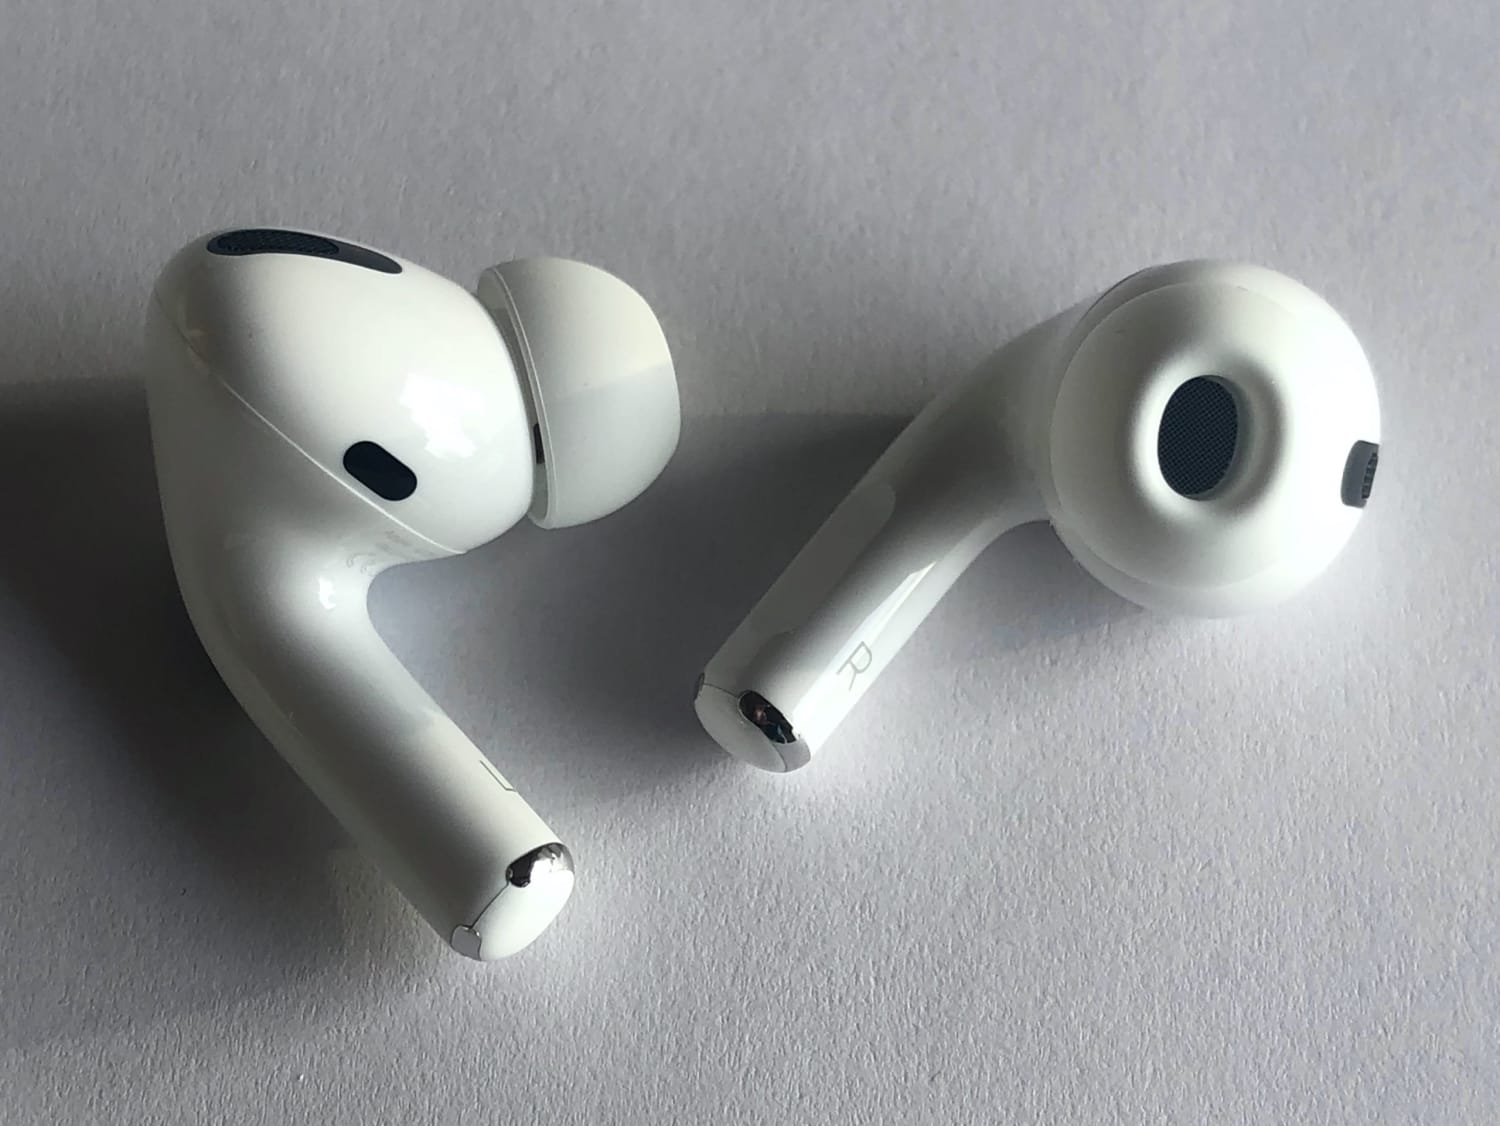 Apple AirPods Pro Review - Are They Best Yet For 2020?